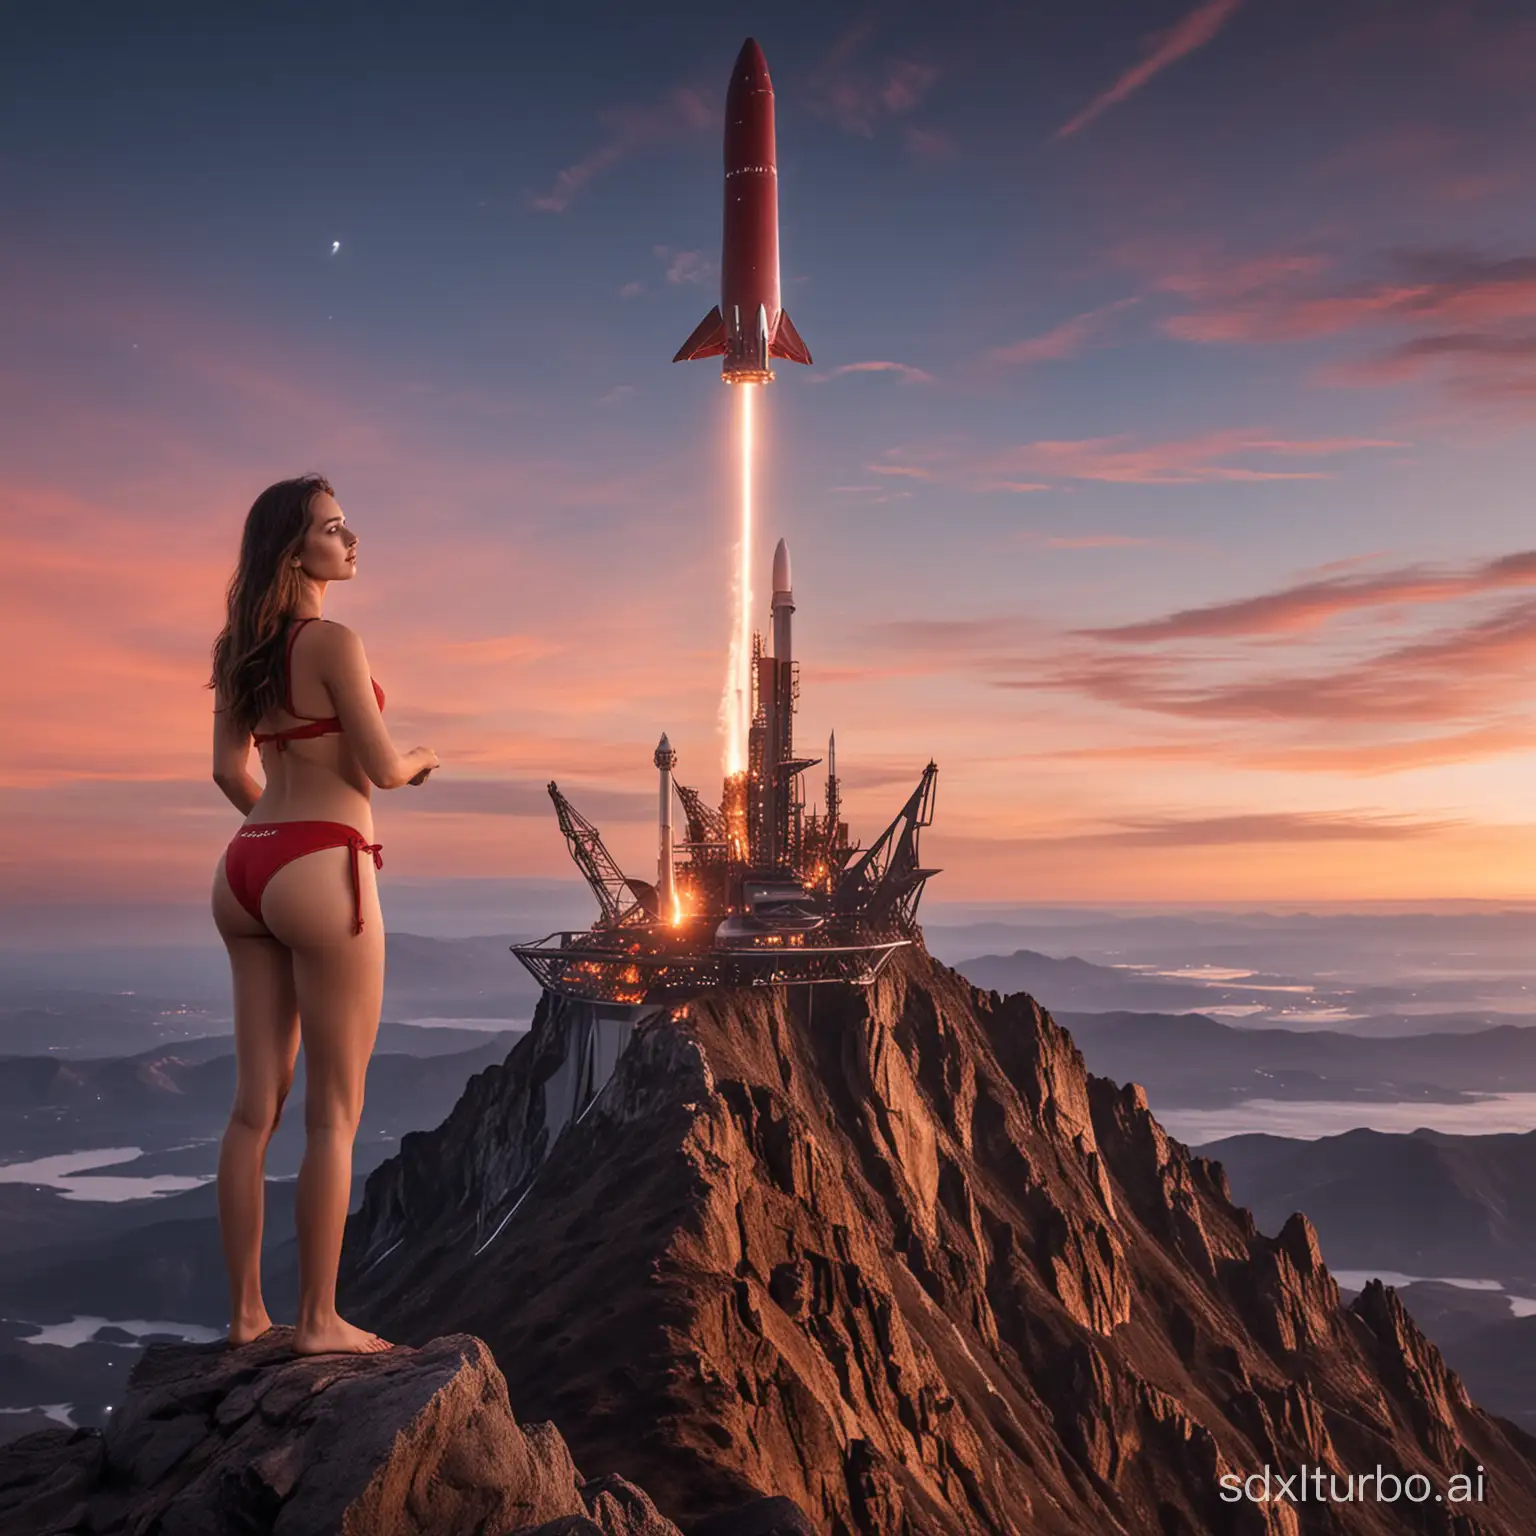 Young-Female-Wizard-Crafting-SpaceX-Spaceship-atop-Mountain-at-Sunrise